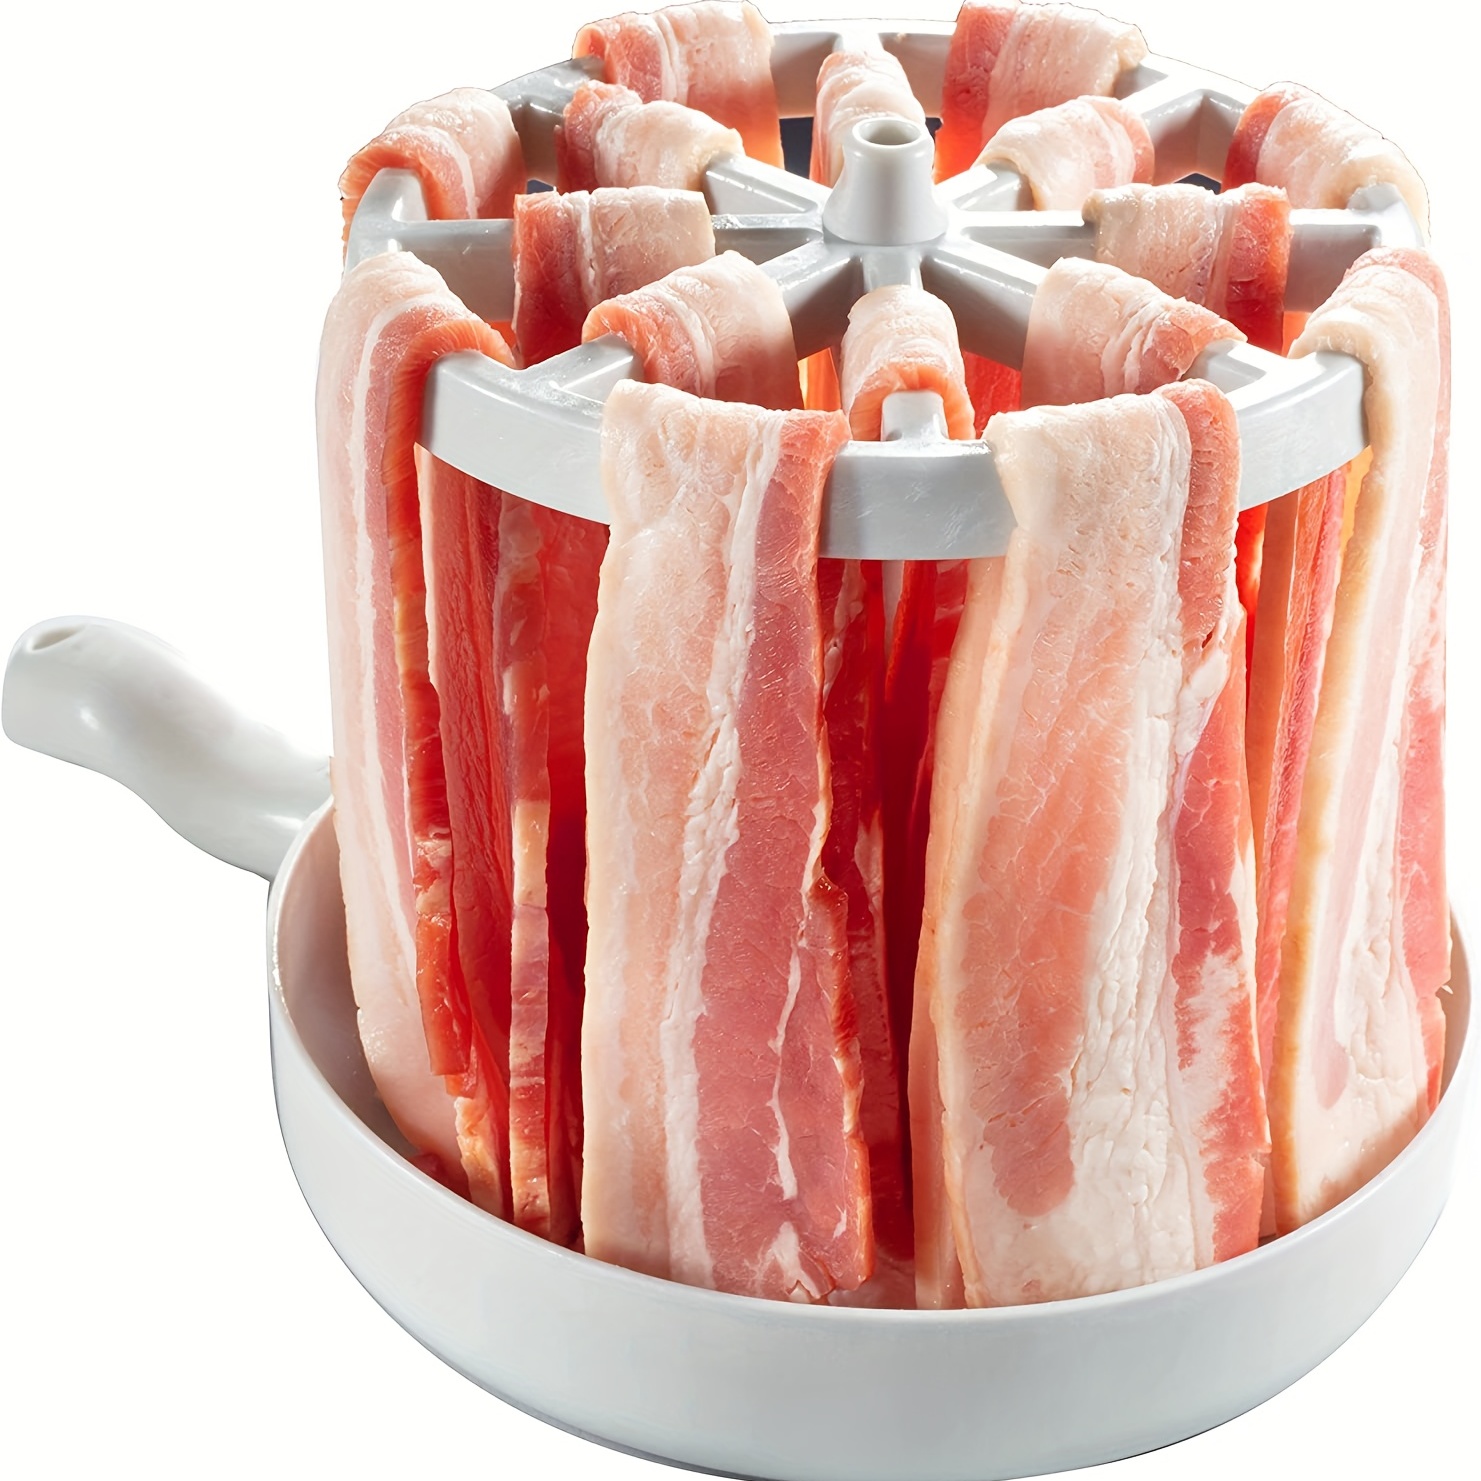 Microwave Bacon Cooker - The Original Bacon Microwave Bacon Tray - Reduces  Fat up to 35% for a Healthy Breakfast 